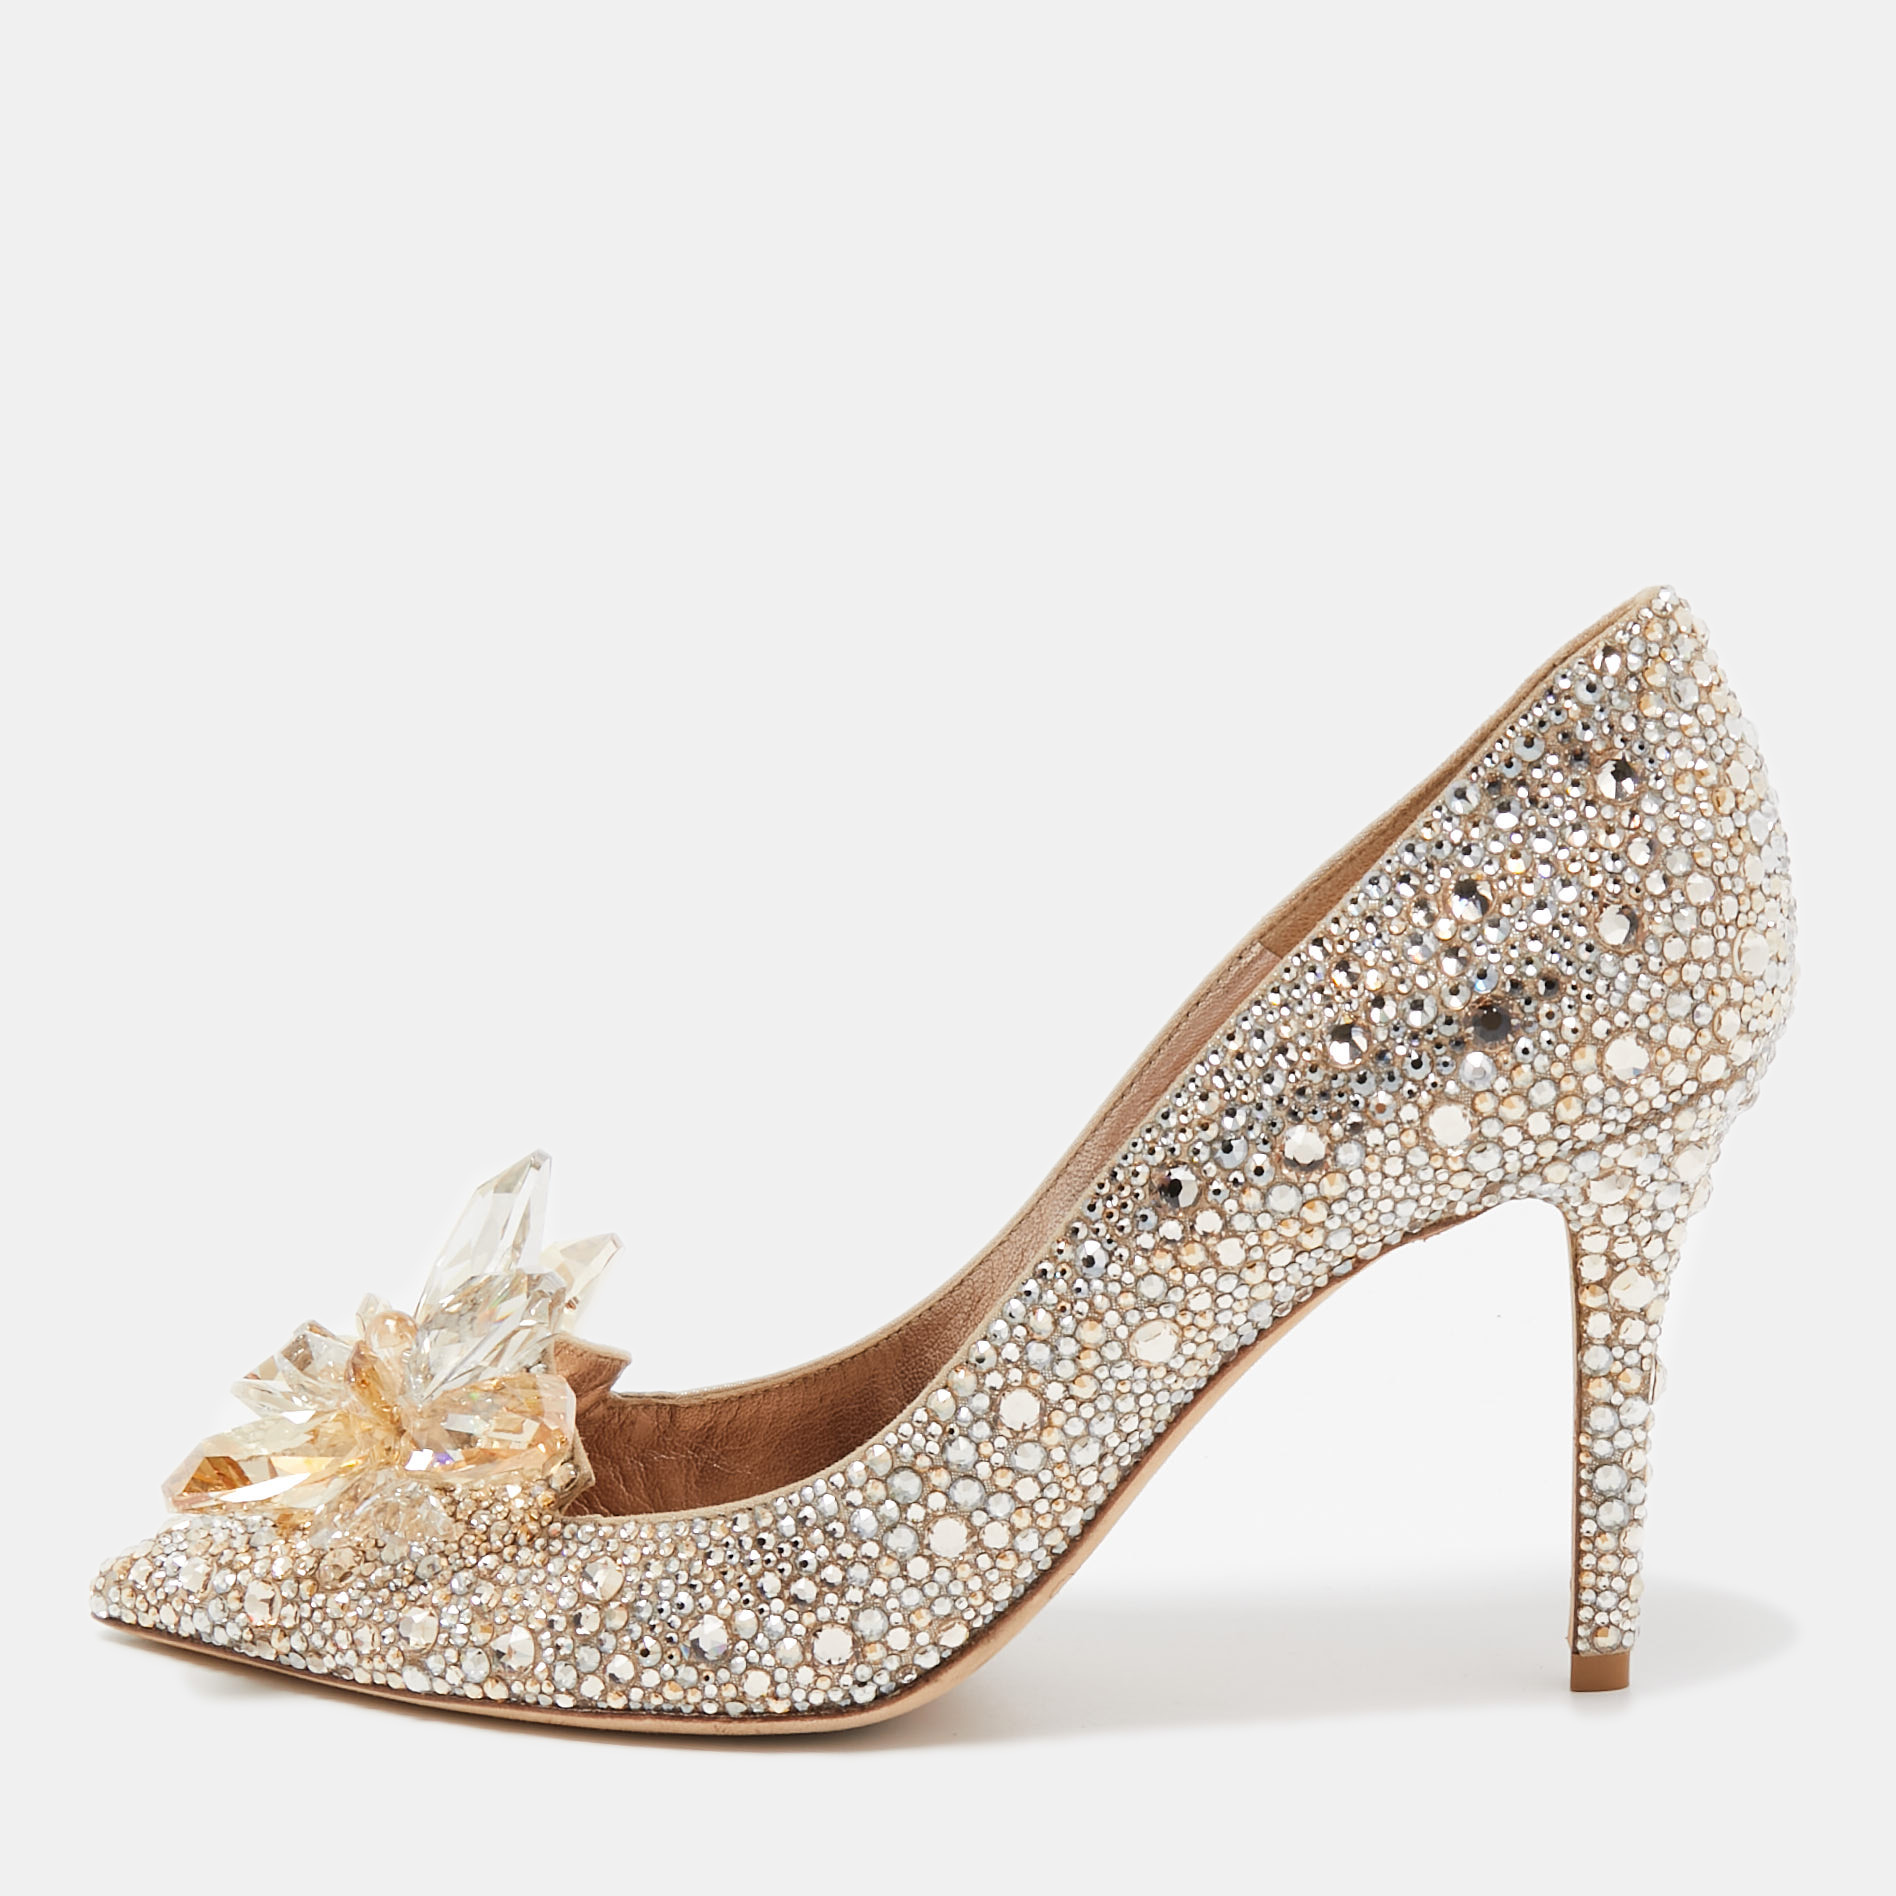 Pre-owned Jimmy Choo Gold Satin Alia Crystal Embellished Pointed Toe Pumps Size 38